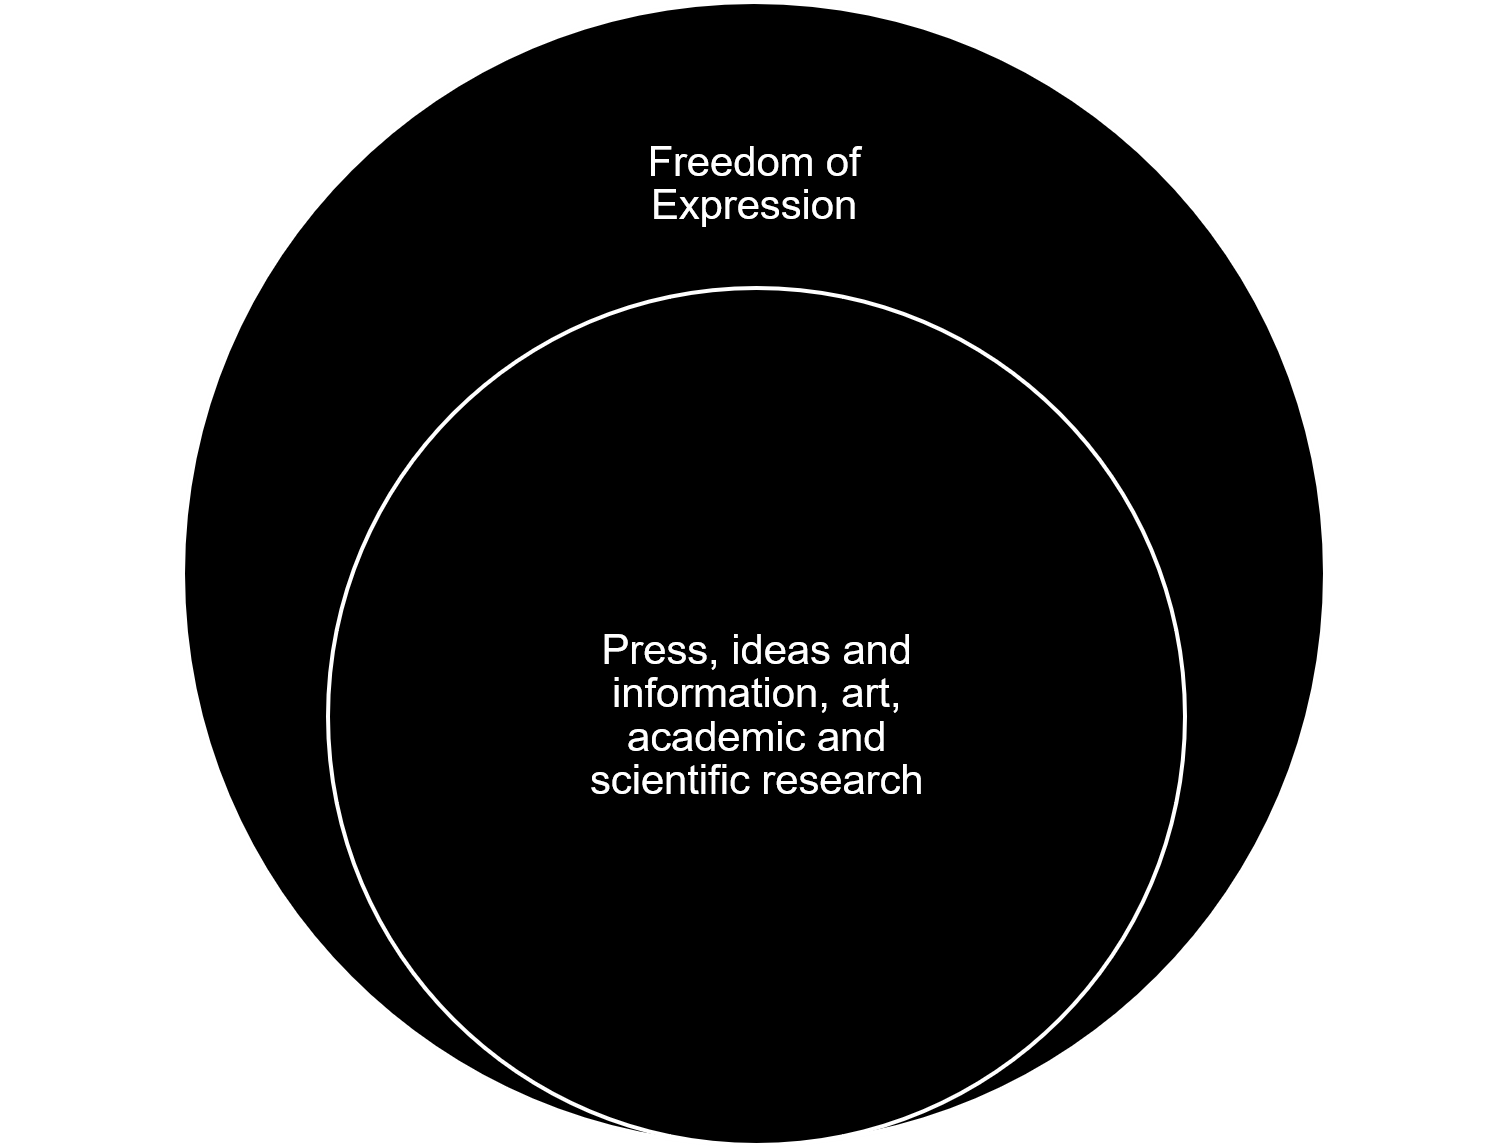 The following diagram illustrates the four instances when (contrary to the media being generally allowed to report on anything), the media’s ability to disseminate and access information will be limited. The four instances listed are defamation, criminal trials, children and refugees, and an interdict for publication.